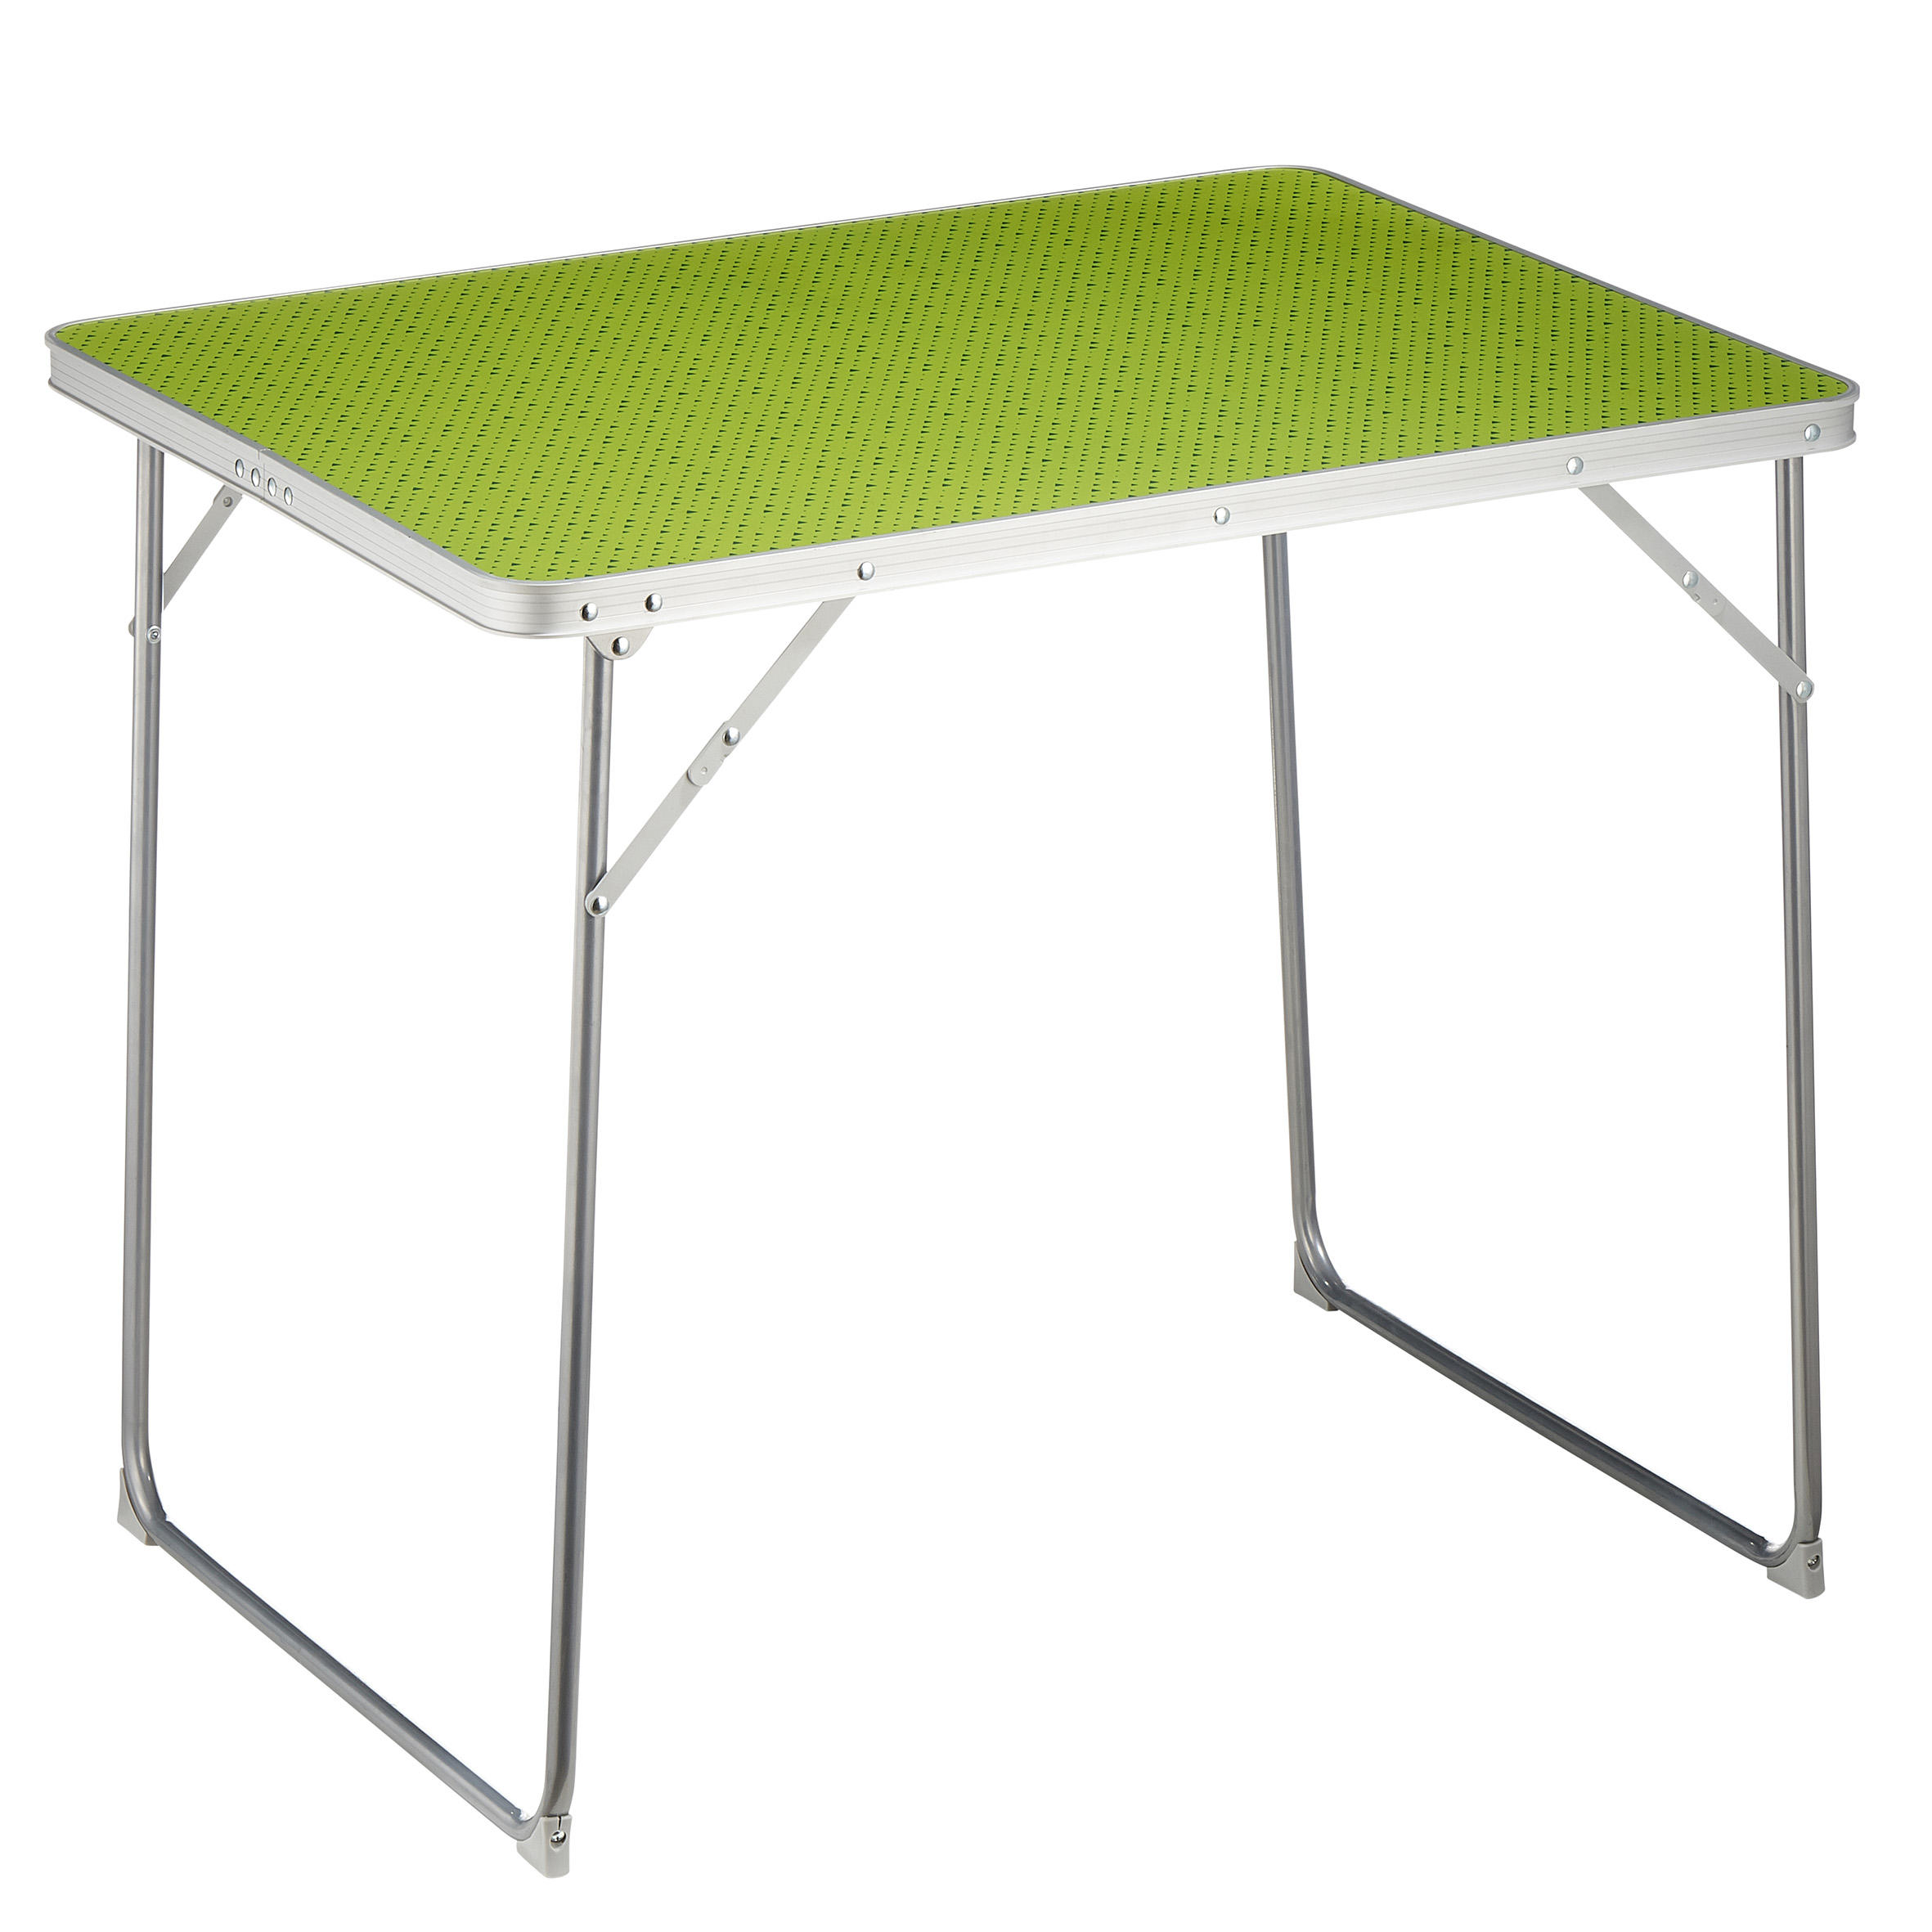 QUECHUA Camping Furniture 4-Person Table - Green